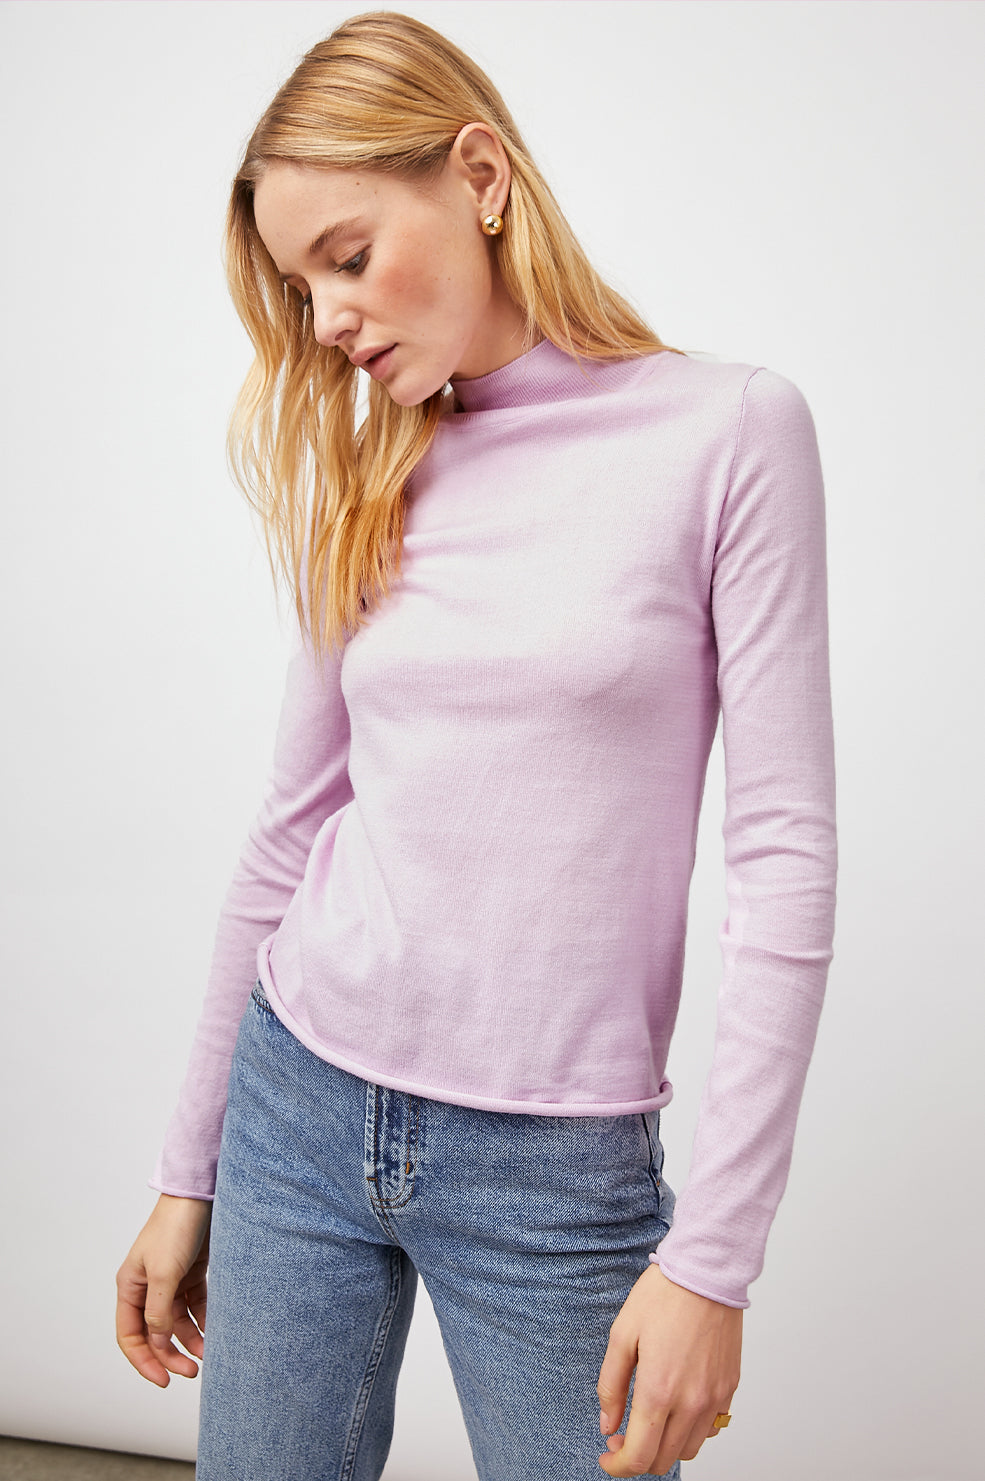 Pink Sweater For Women